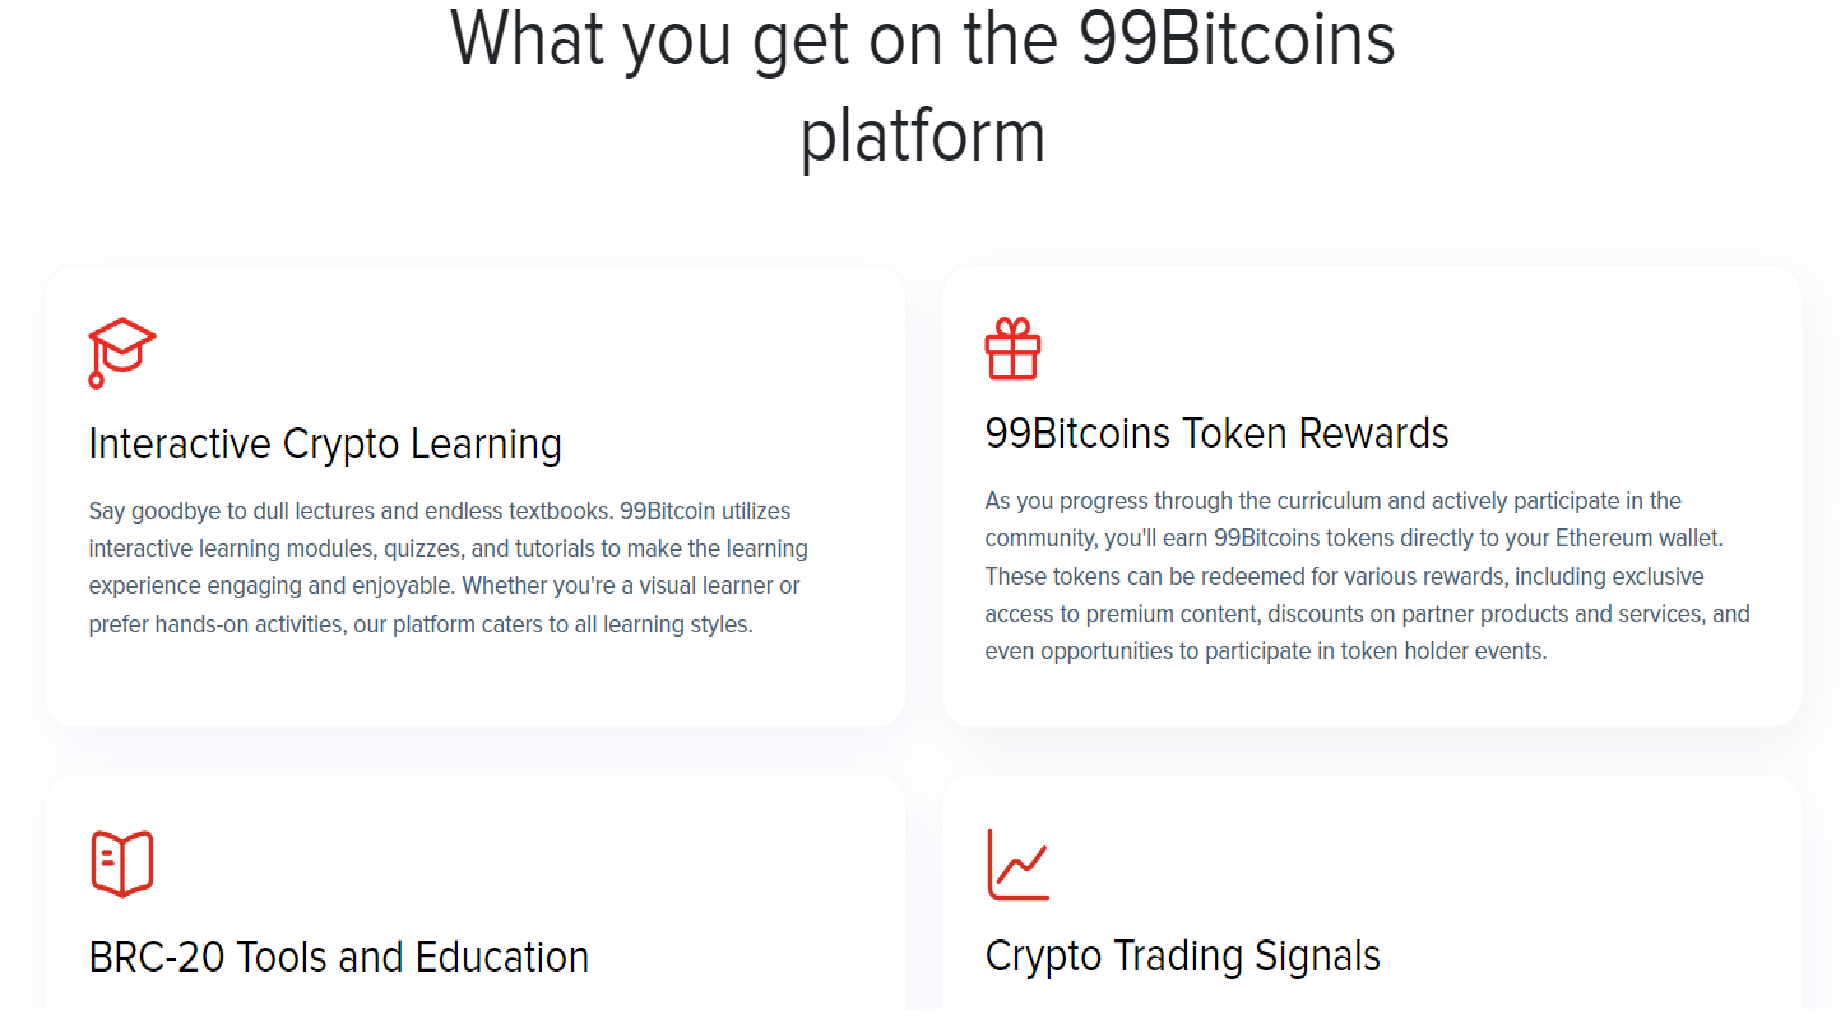 Interactive learning and rewards with 99Bitcoins